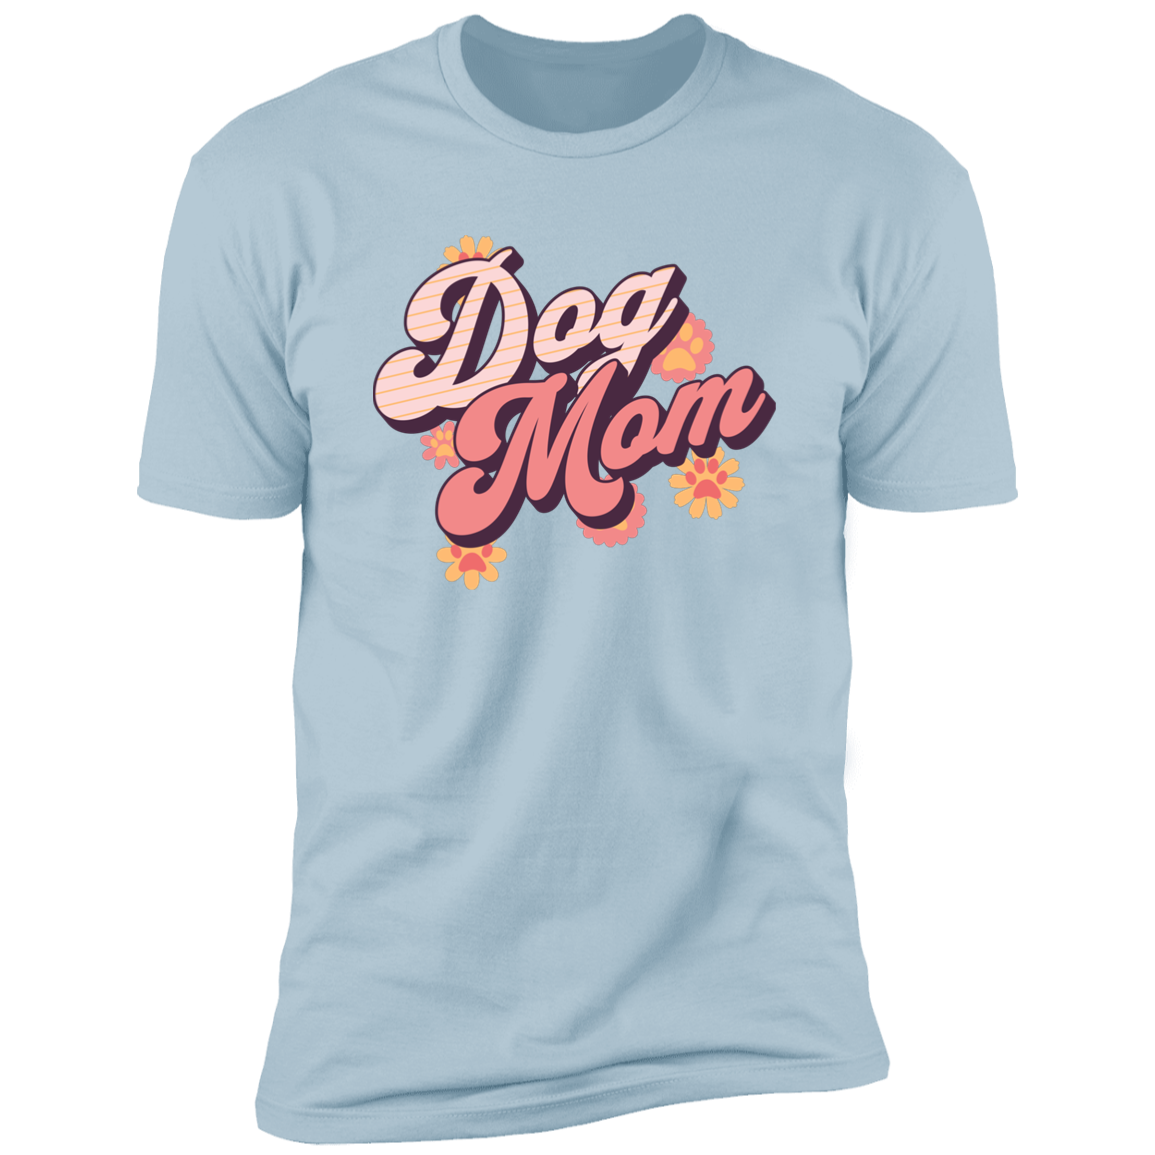 Retro Dog Mom t-shirt, Dog Mom shirt, Dog T-shirt for humans, in light blue